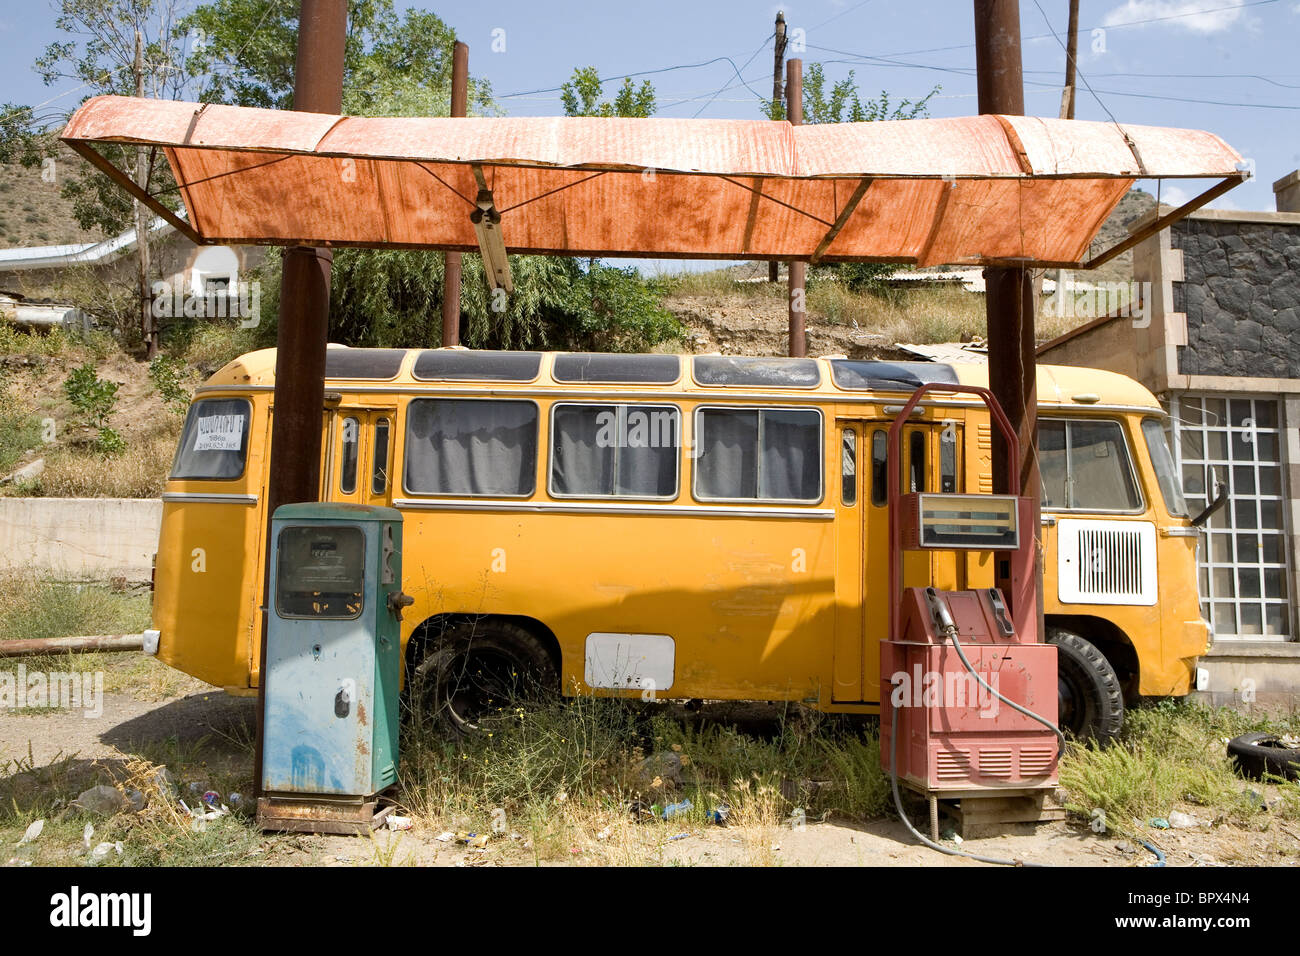 Travel Yellow Camper Van and Abandoned Old Petrol/ Gas in a Station with Red and Blue pumps in Armenia. Stock Photo